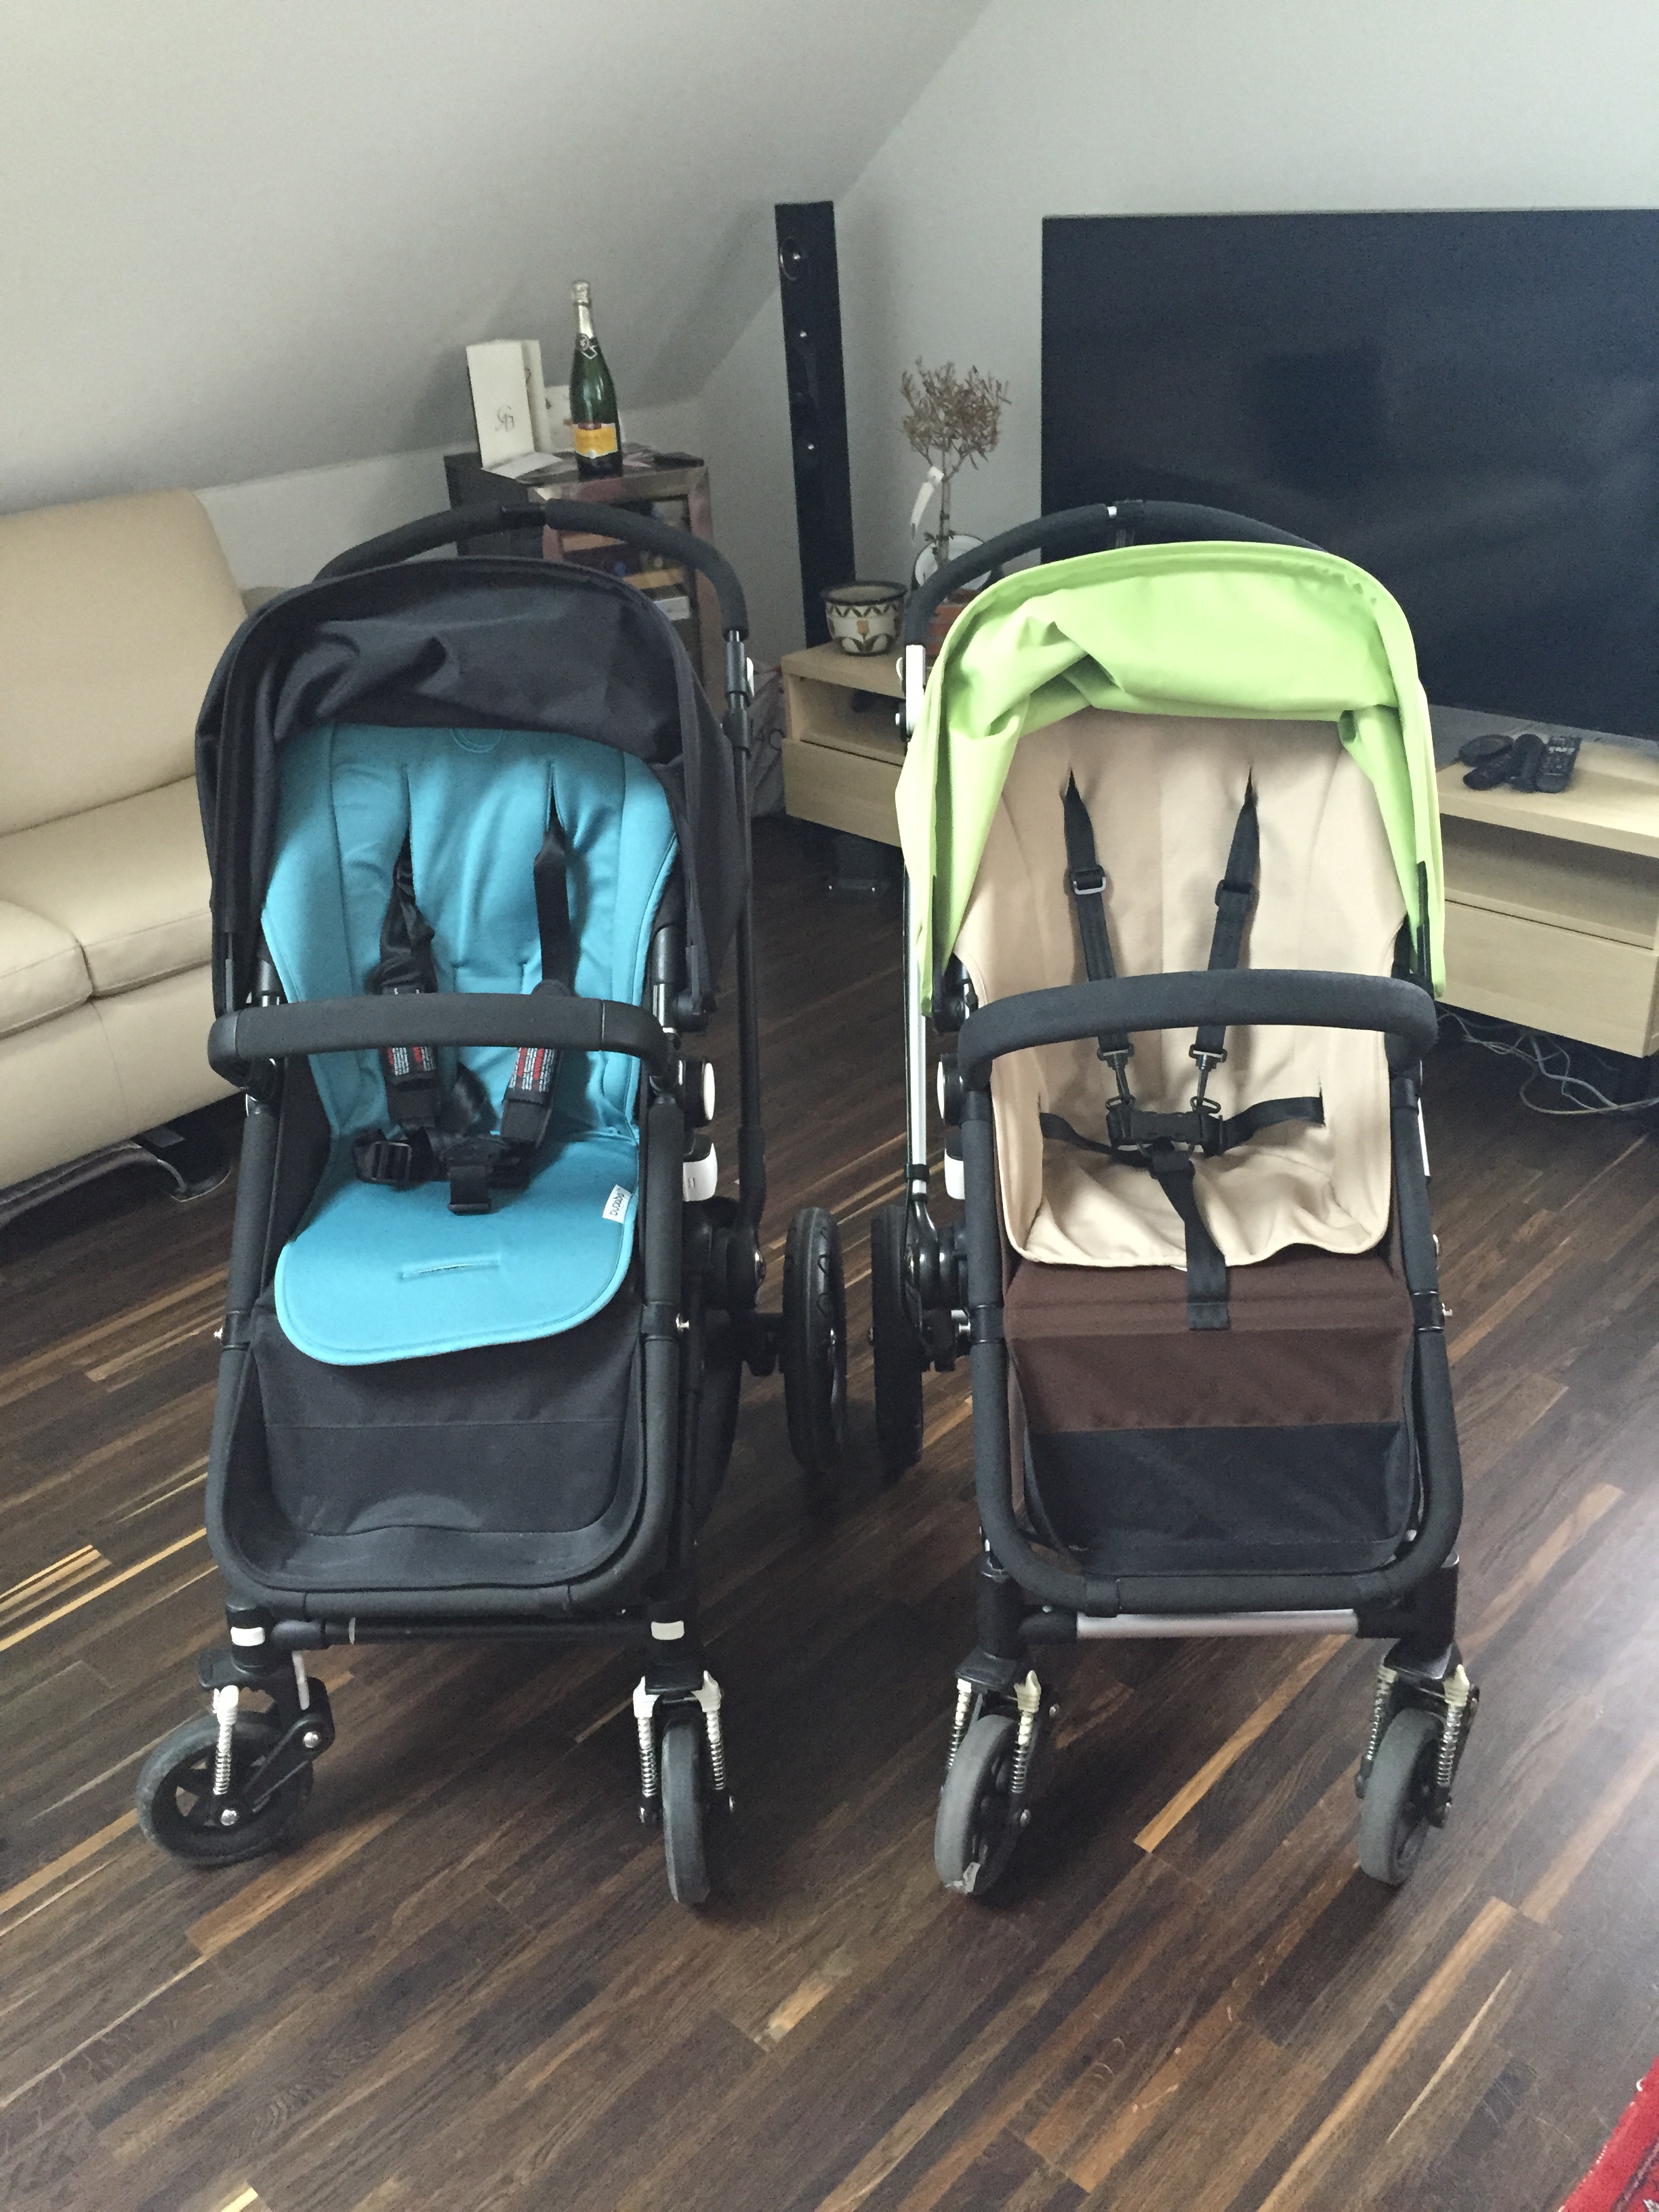 bugaboo cameleon 1 2 3 differences